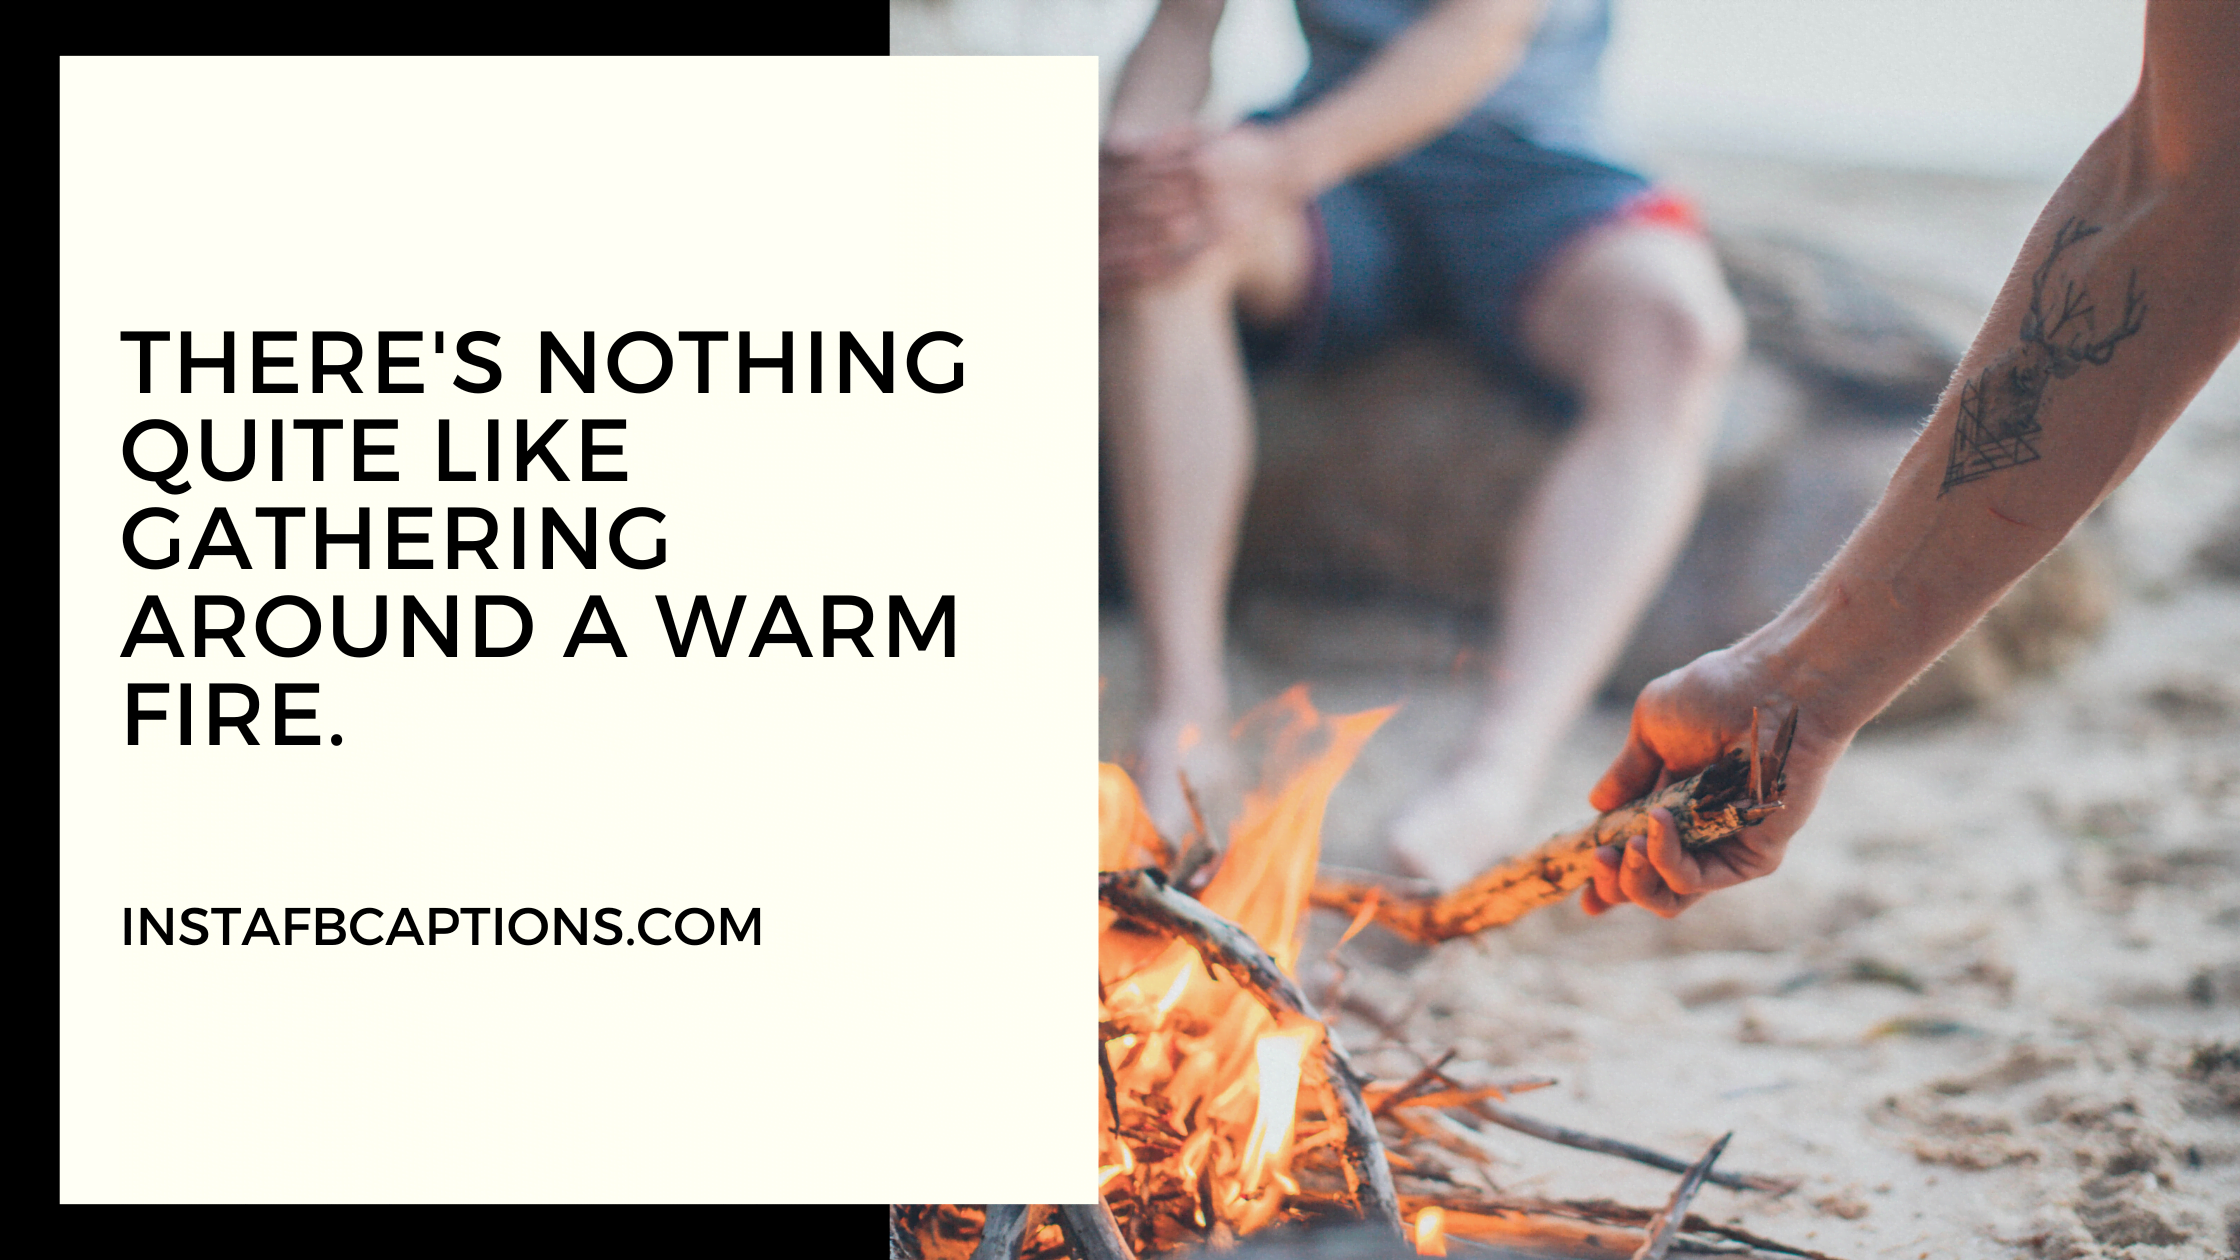 There's nothing quite like gathering around a warm fire. fire instagram captions - Reddit Fire Instagram Captions - [NEW] Fire Captions Quotes For Instagram in 2023